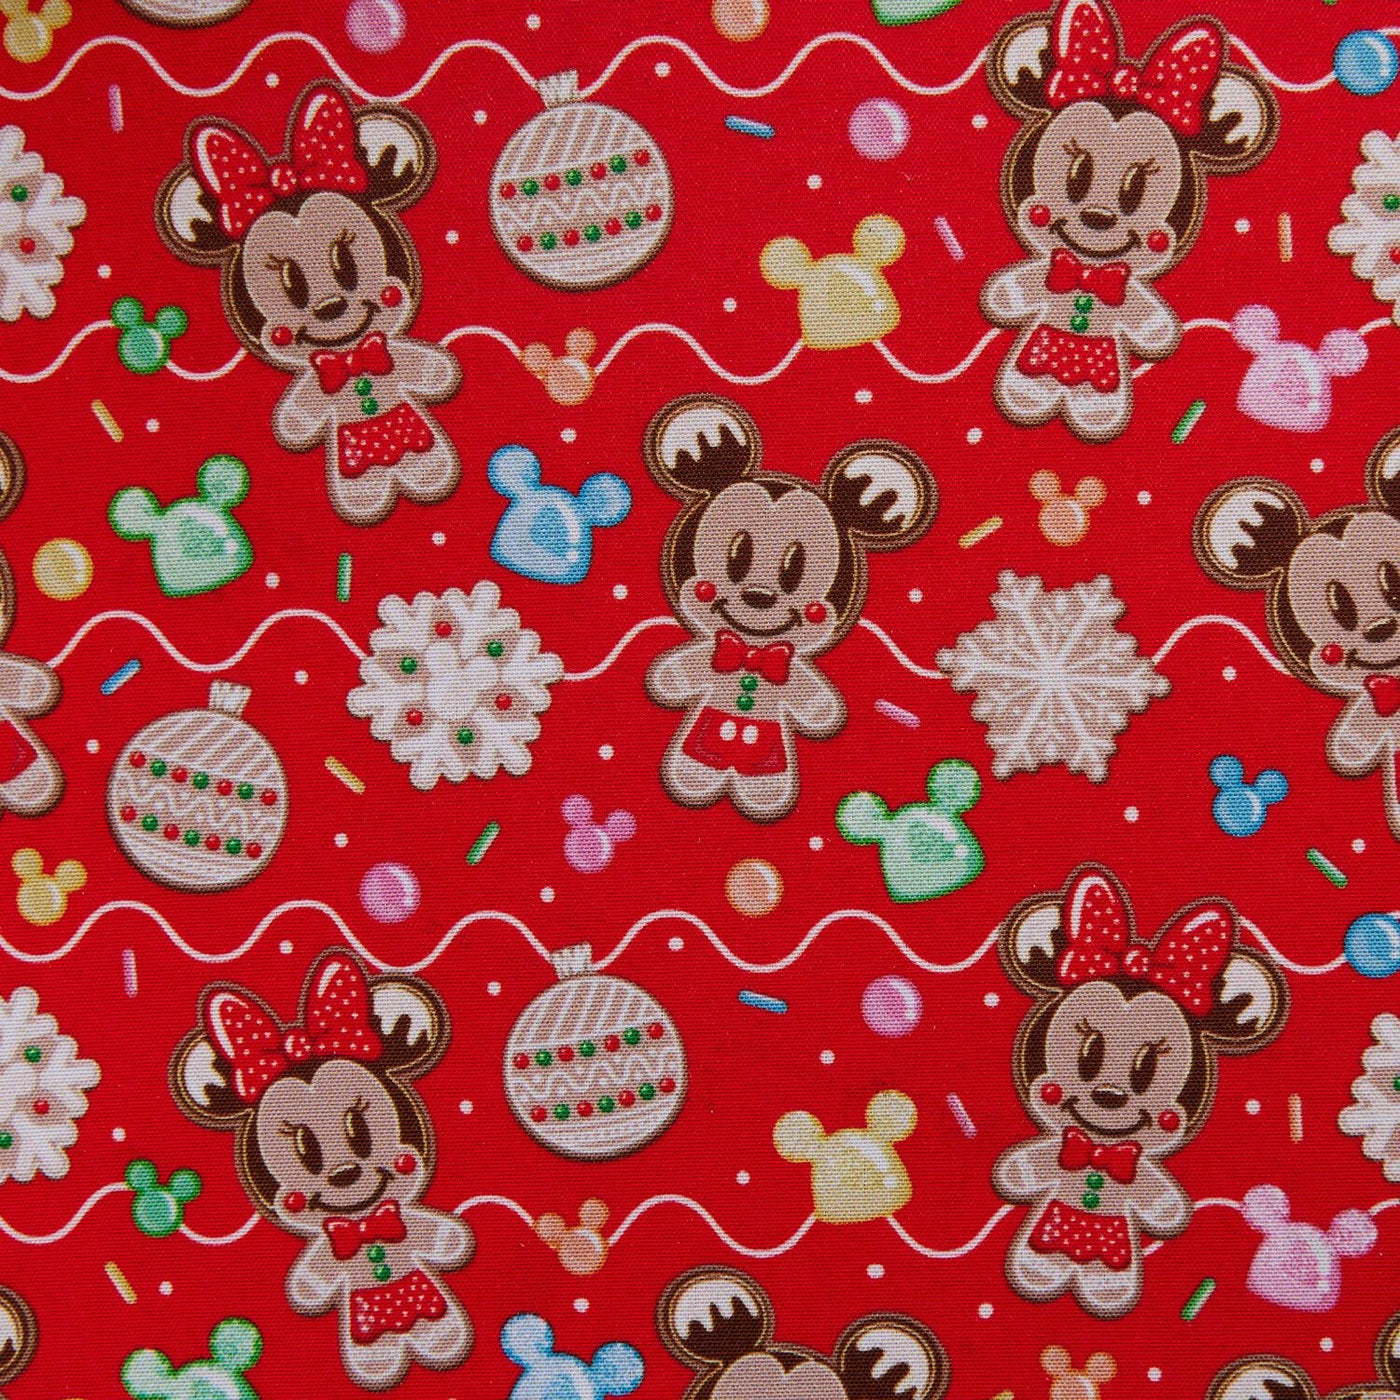 Stitch Shoppe by Loungefly Disney Minnie Mouse Gingerbread House Crossbody Bag - Interior Lining - 671803441842